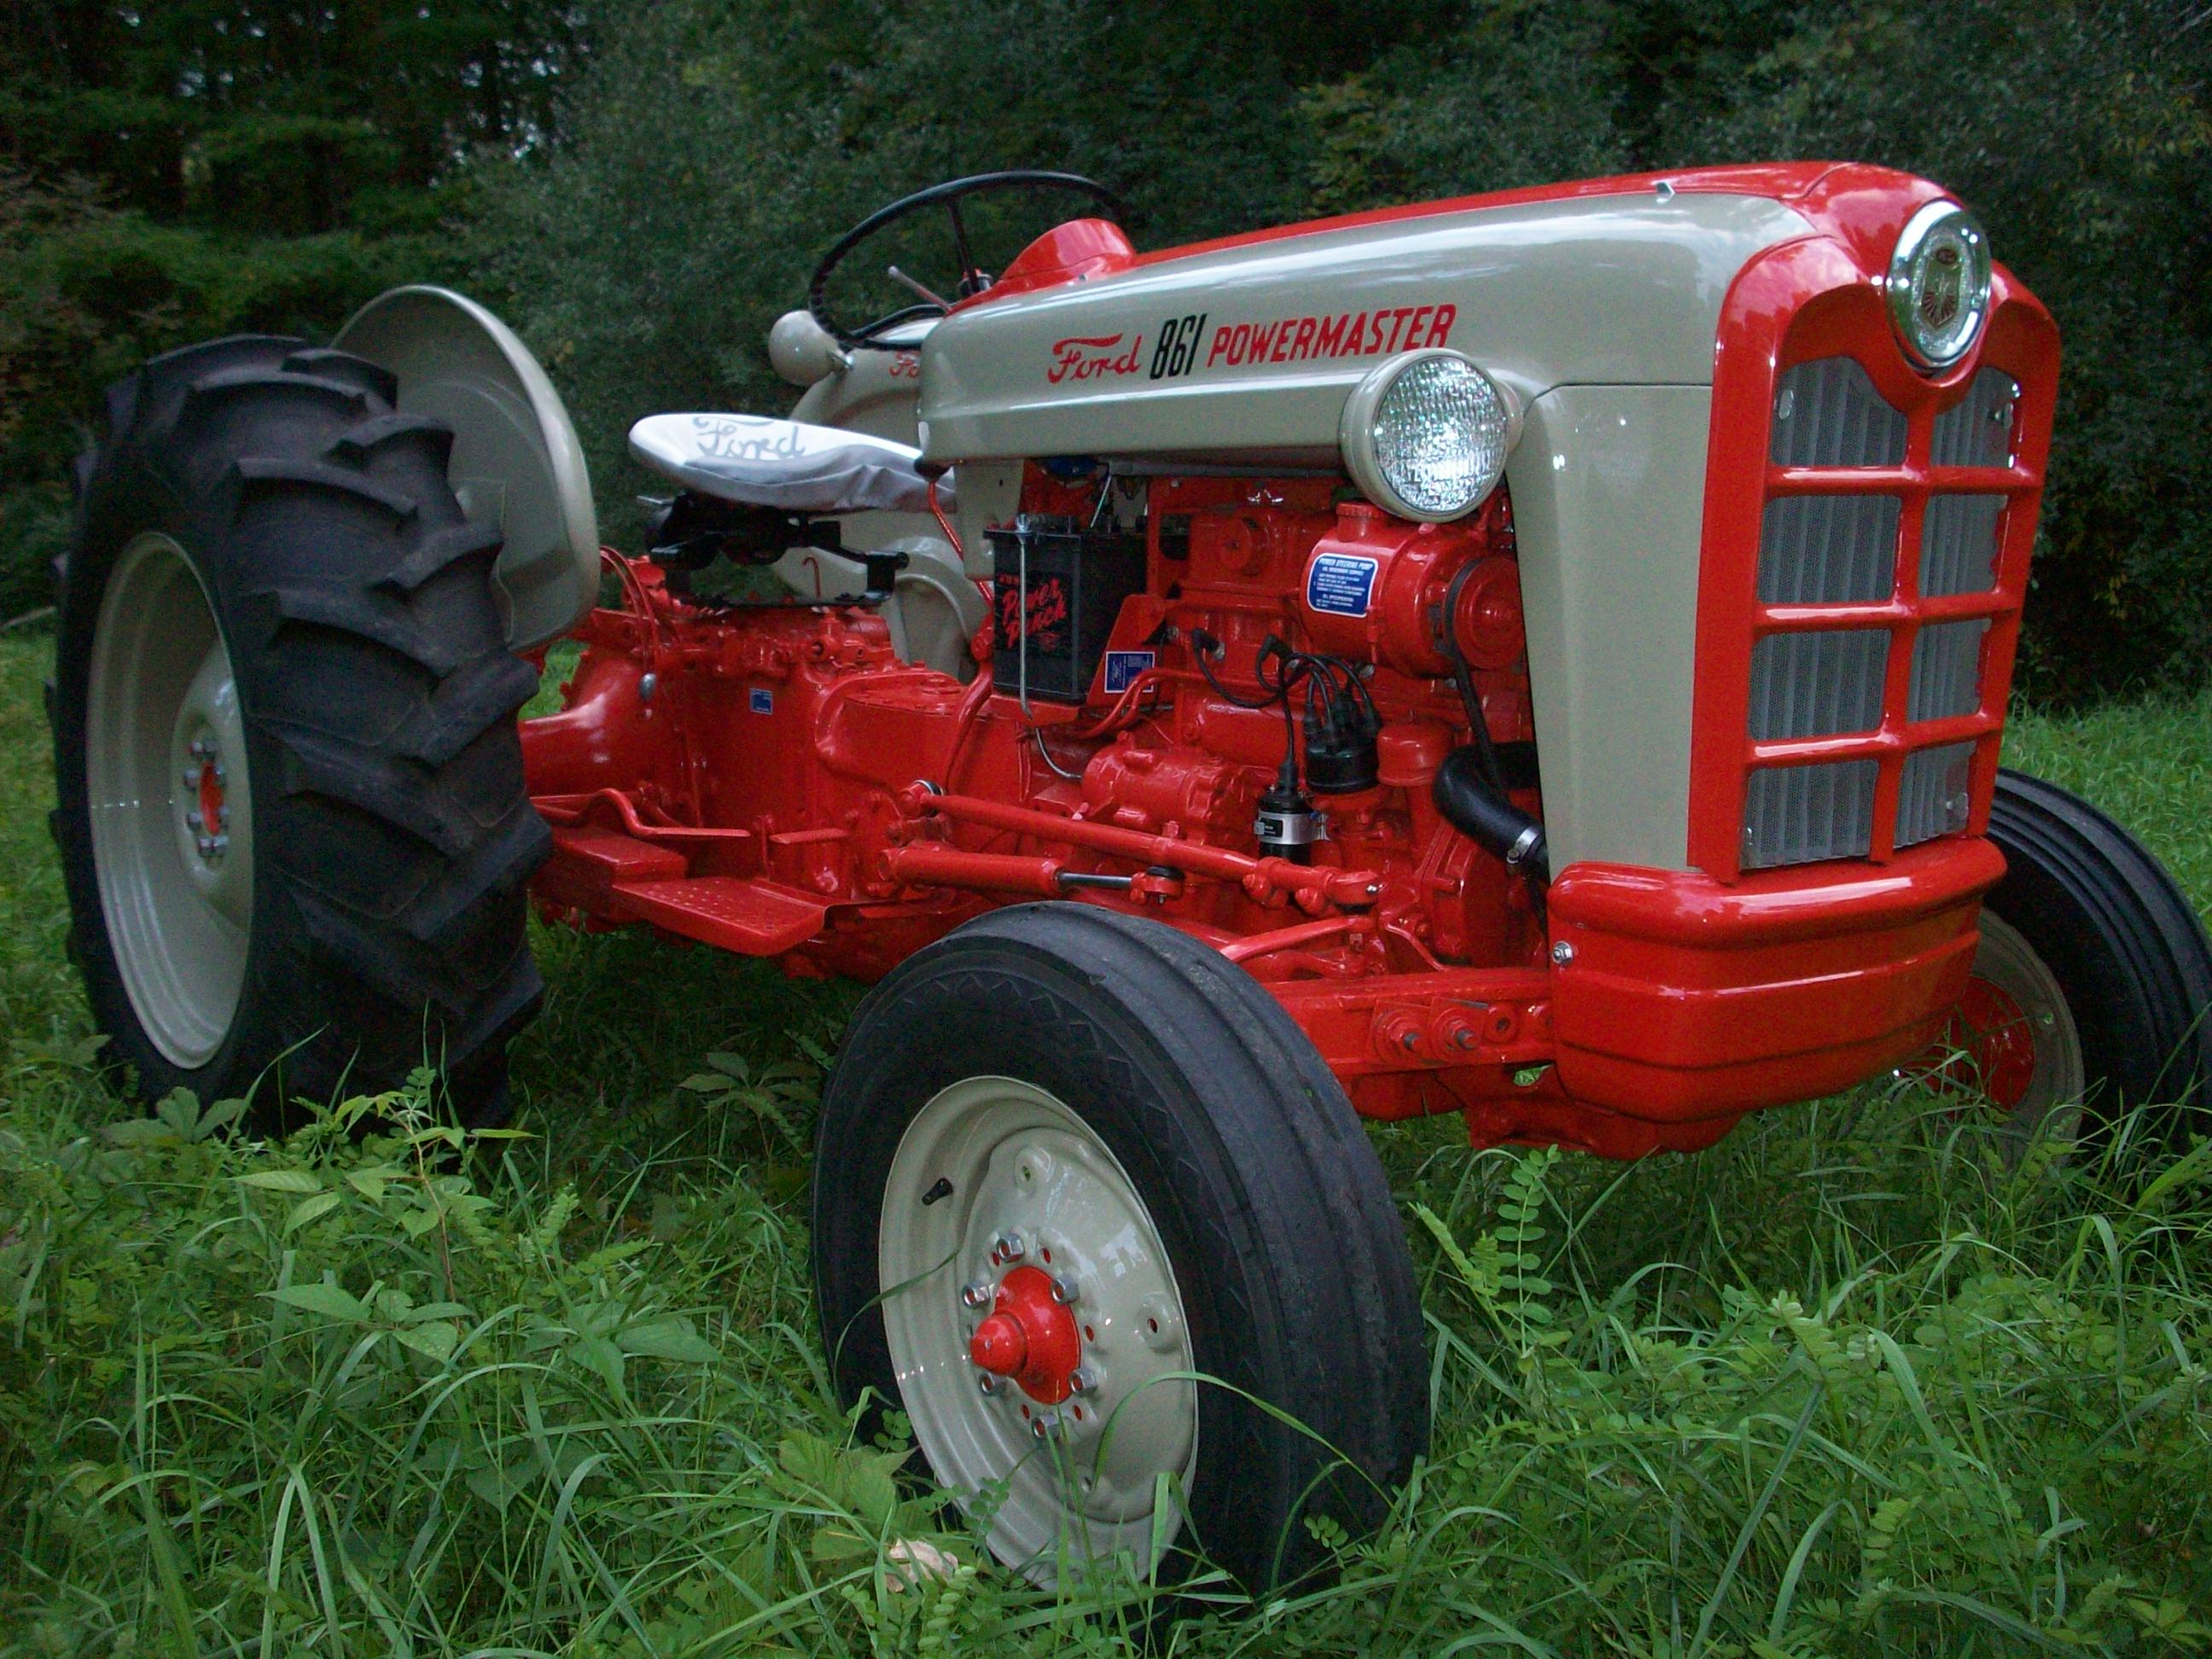 Ford 861 powermaster tractor for sale #5